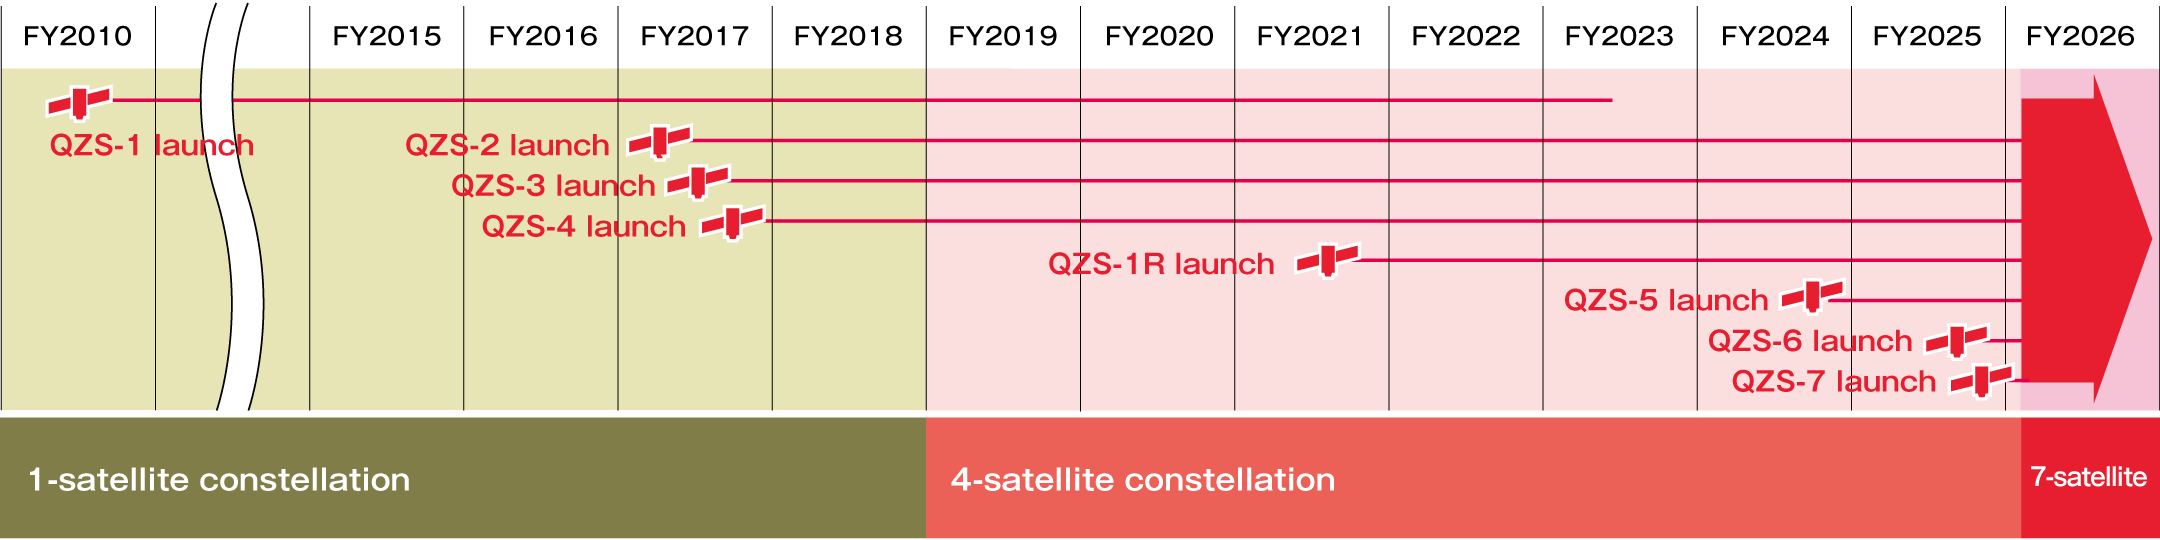 The first Quasi-Zenith Satellite was launched in FY2010, then the additional three satellites were launched in FY2017, and four-satellite constellation has been operated since November 2018.